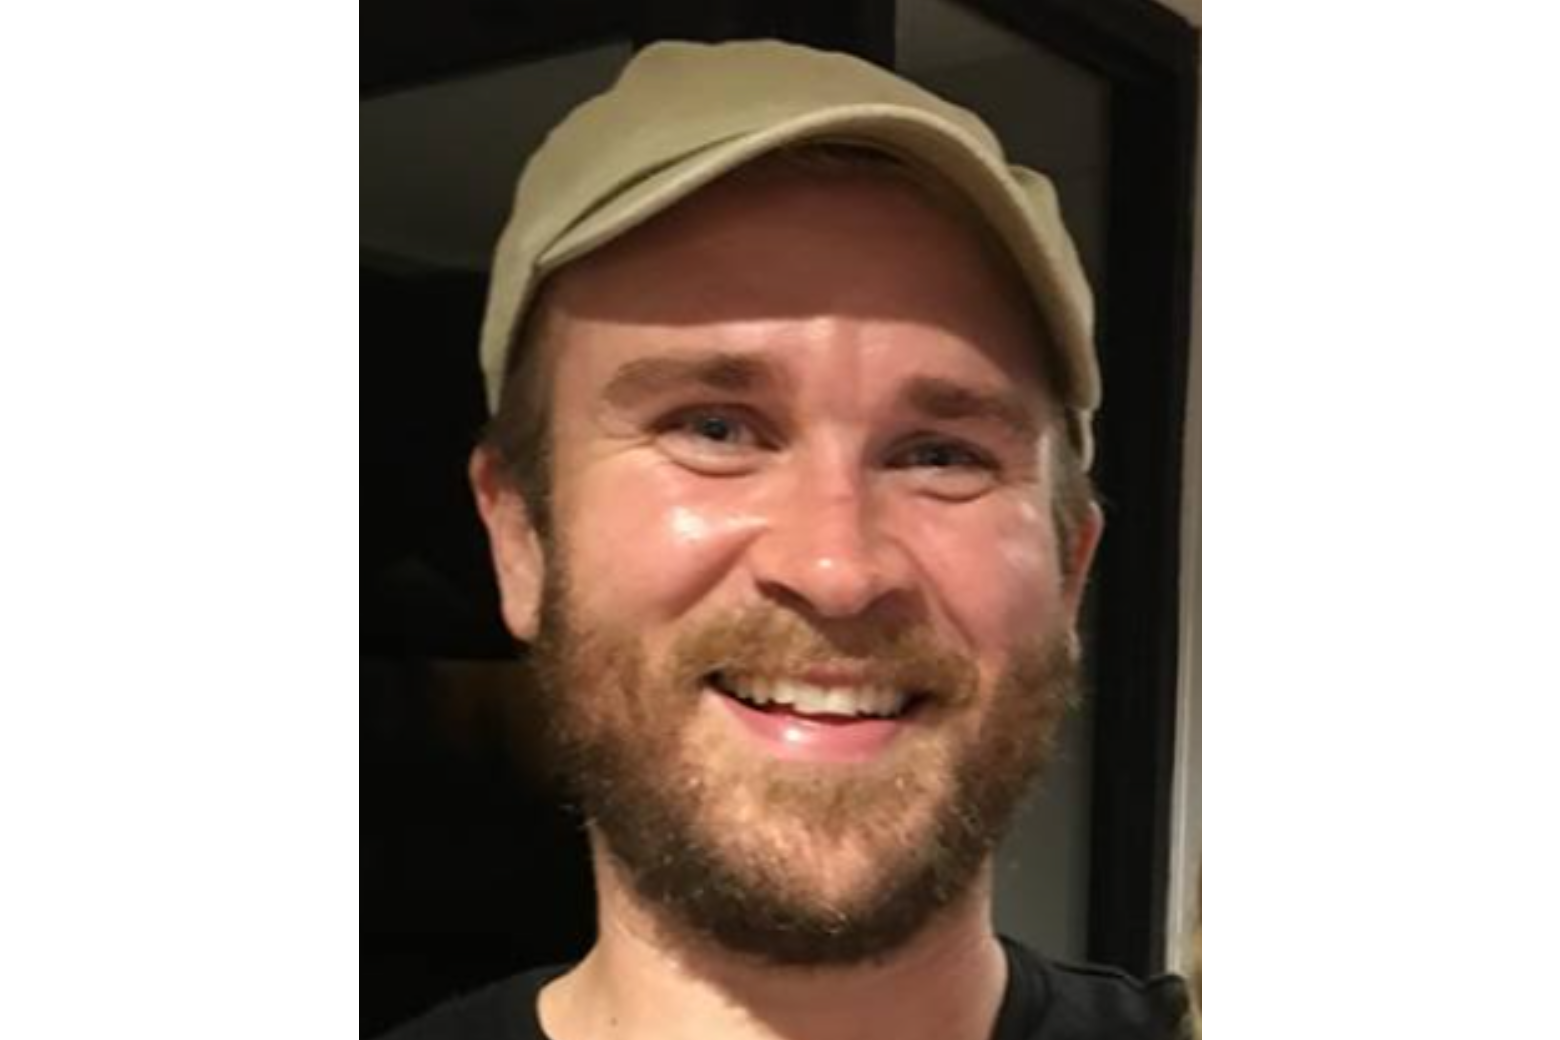 Ben Newell, pictured, smiling with cap on